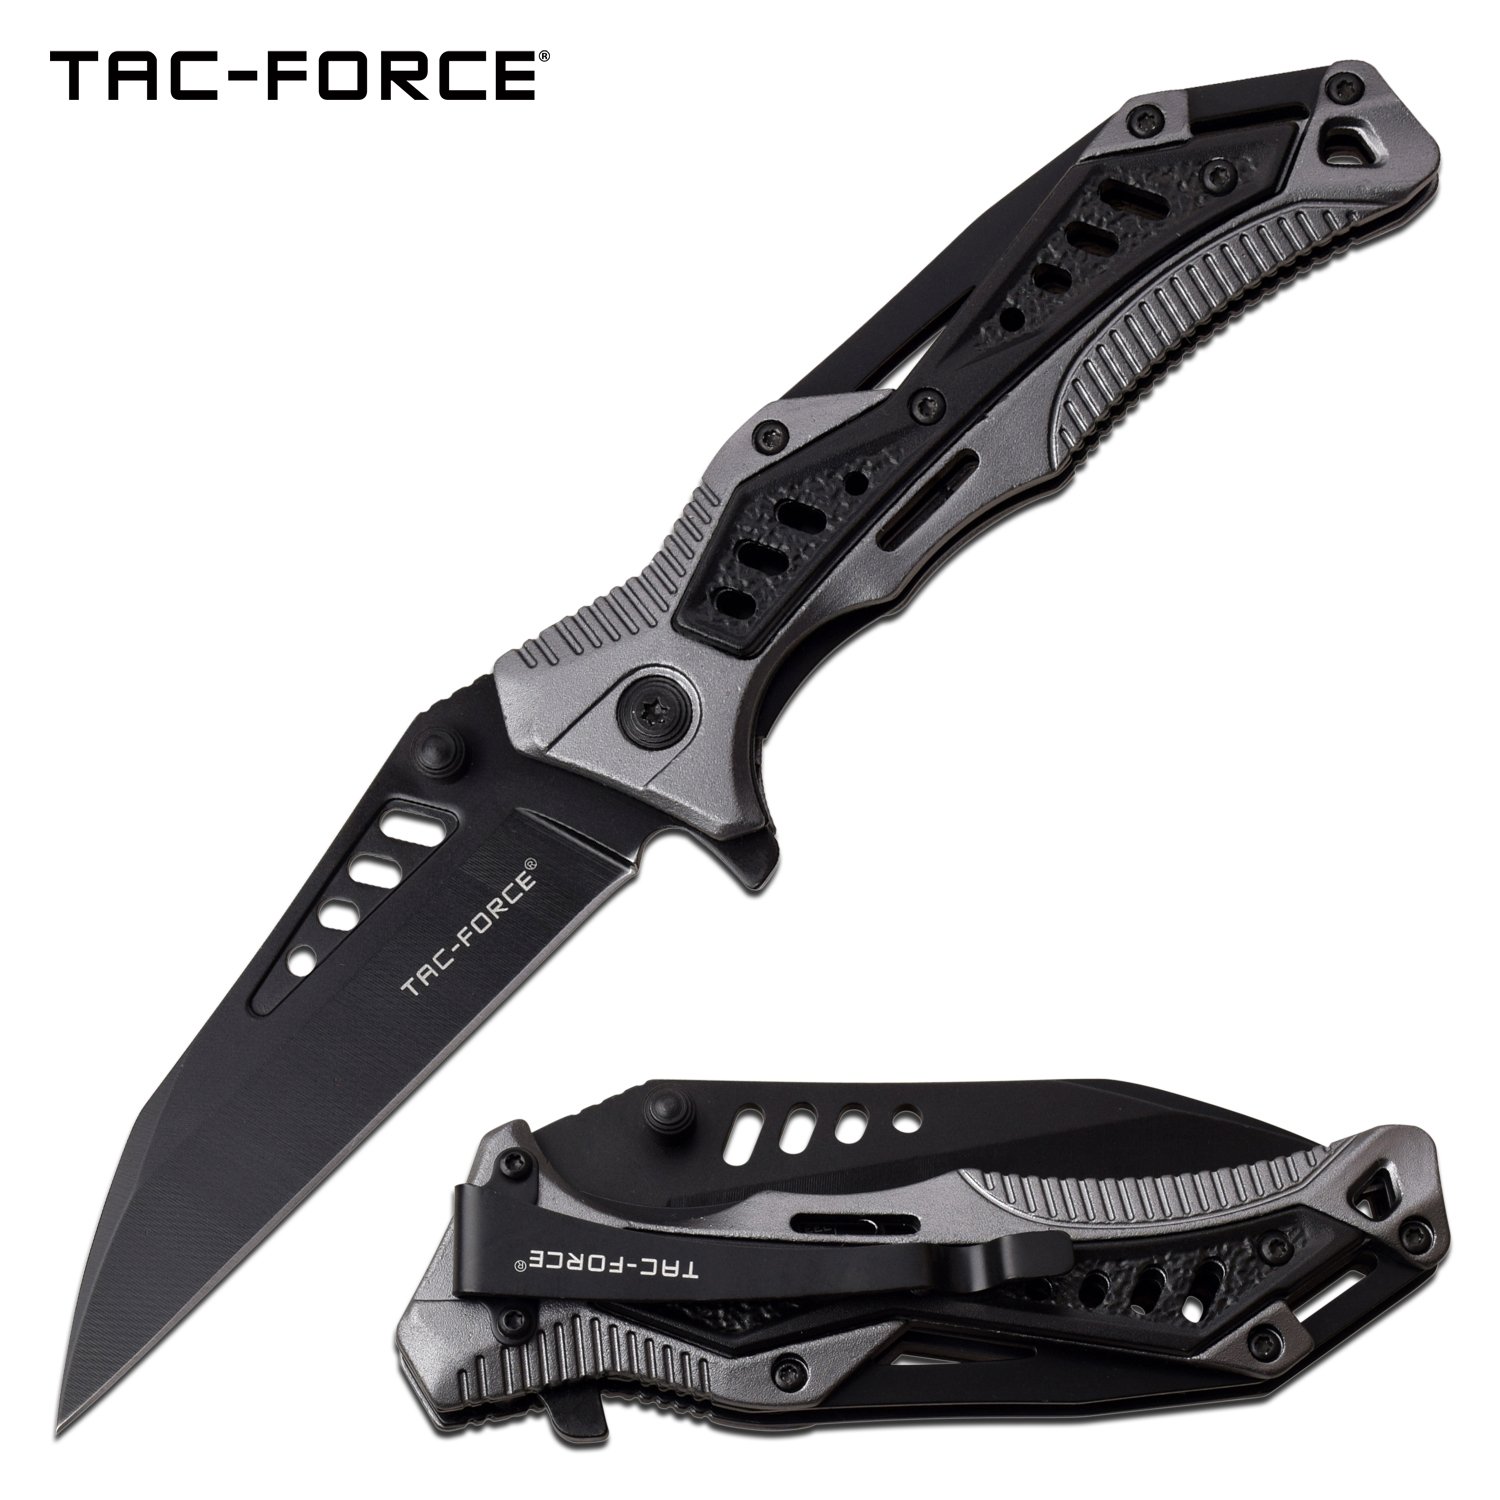 Spring-Assist Folding Knife Tac-Force Black Wharncliffe Blade EDC Tactical Gray